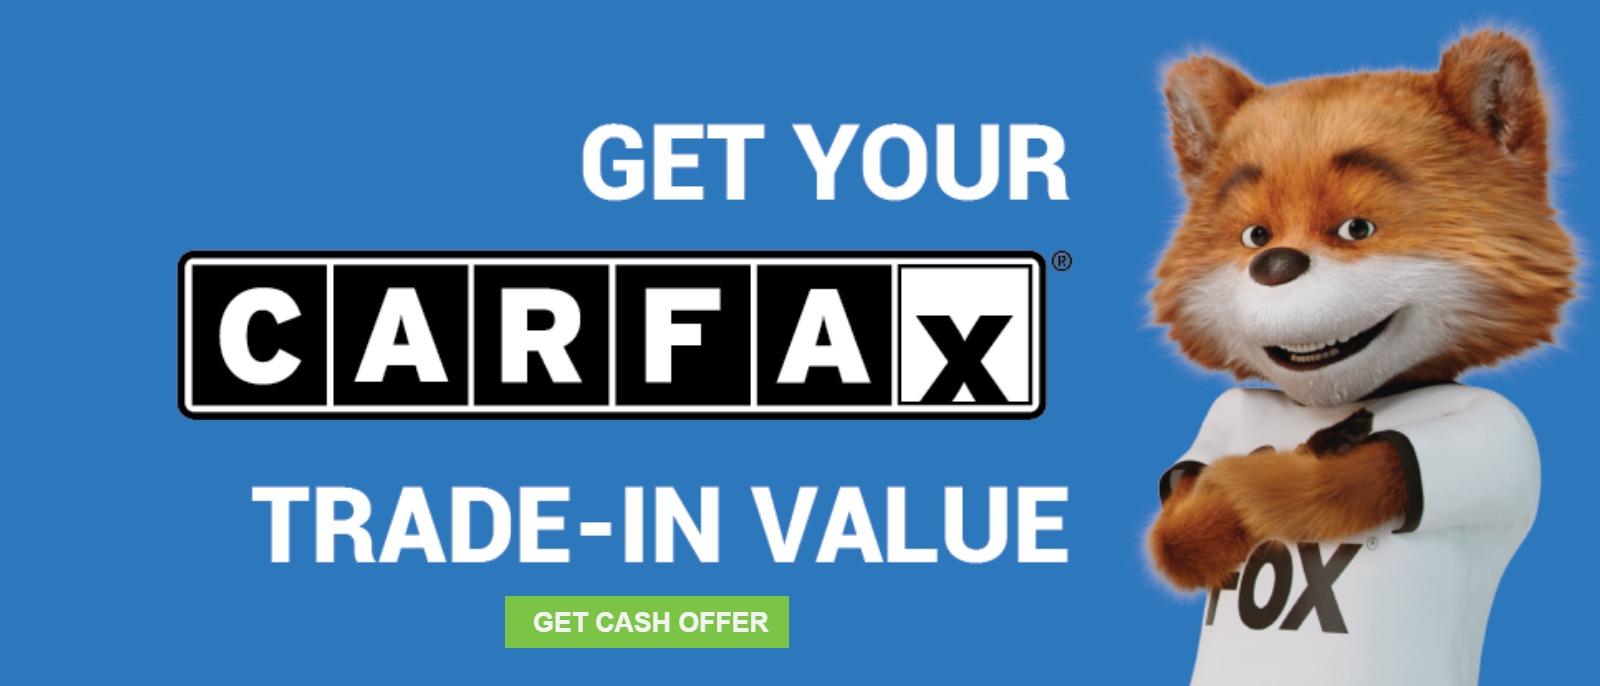 Get Your CarFax Trade-In Value - Get Cash Offer